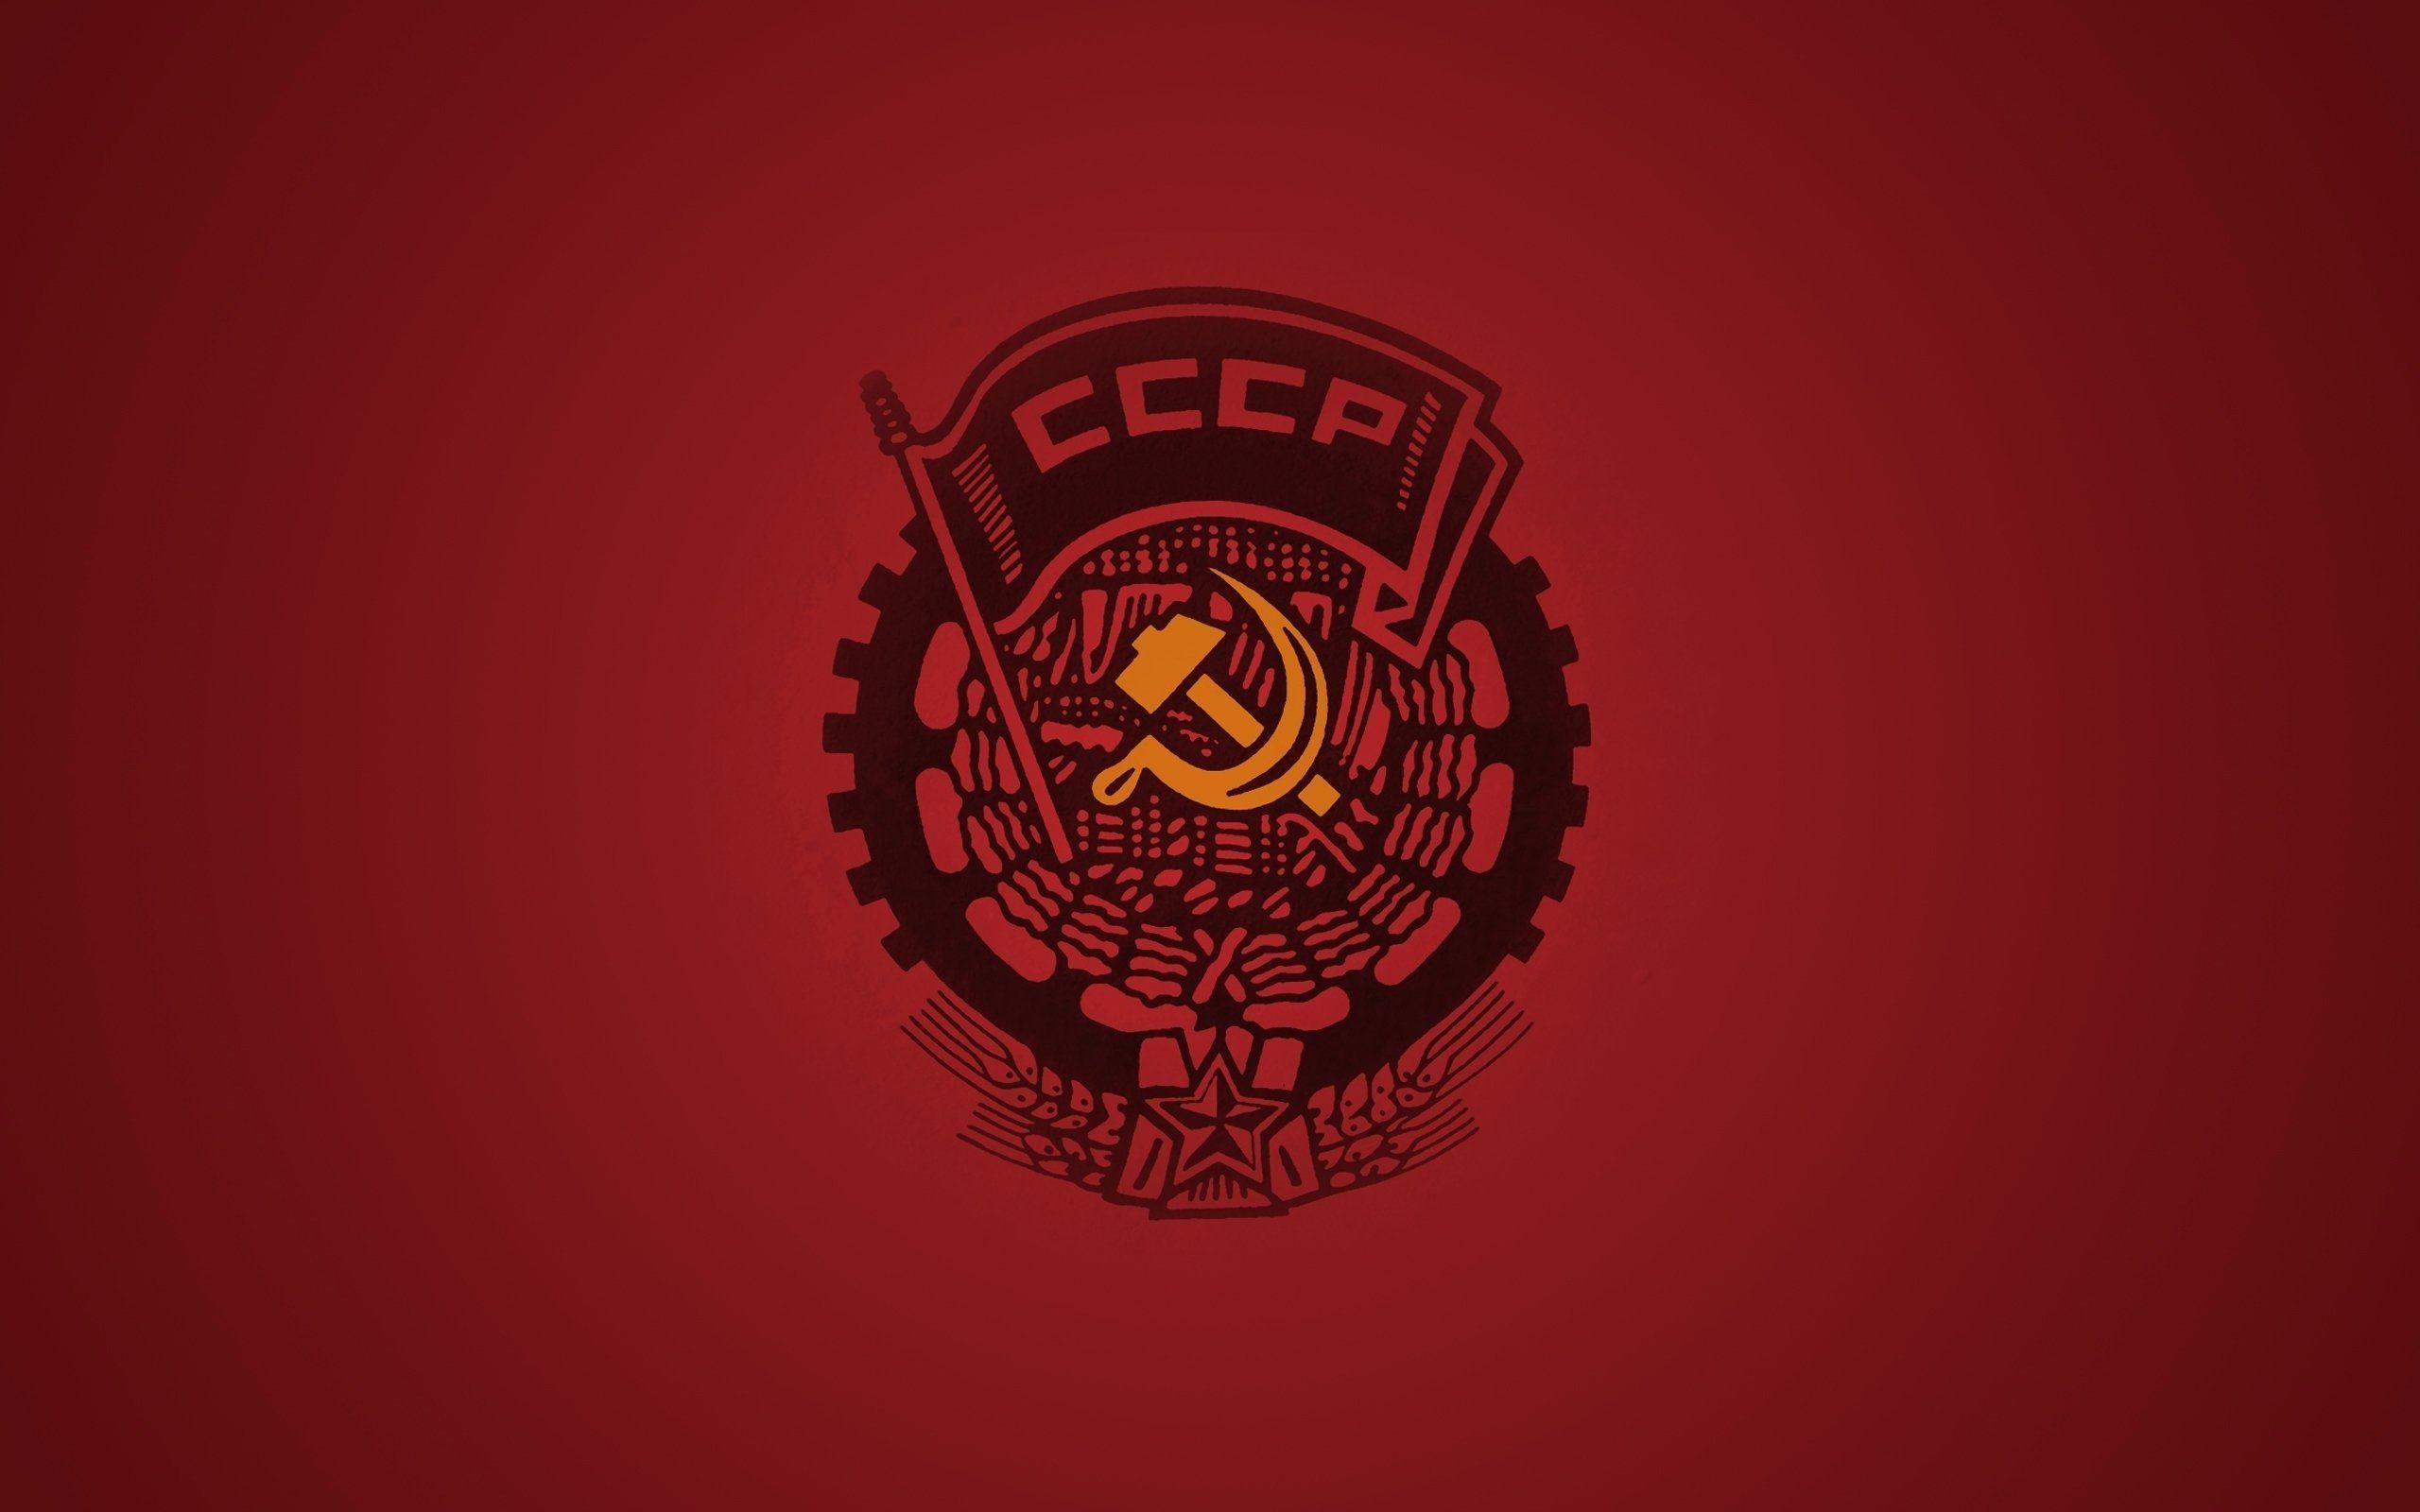 Russian Flag Wallpaper Background